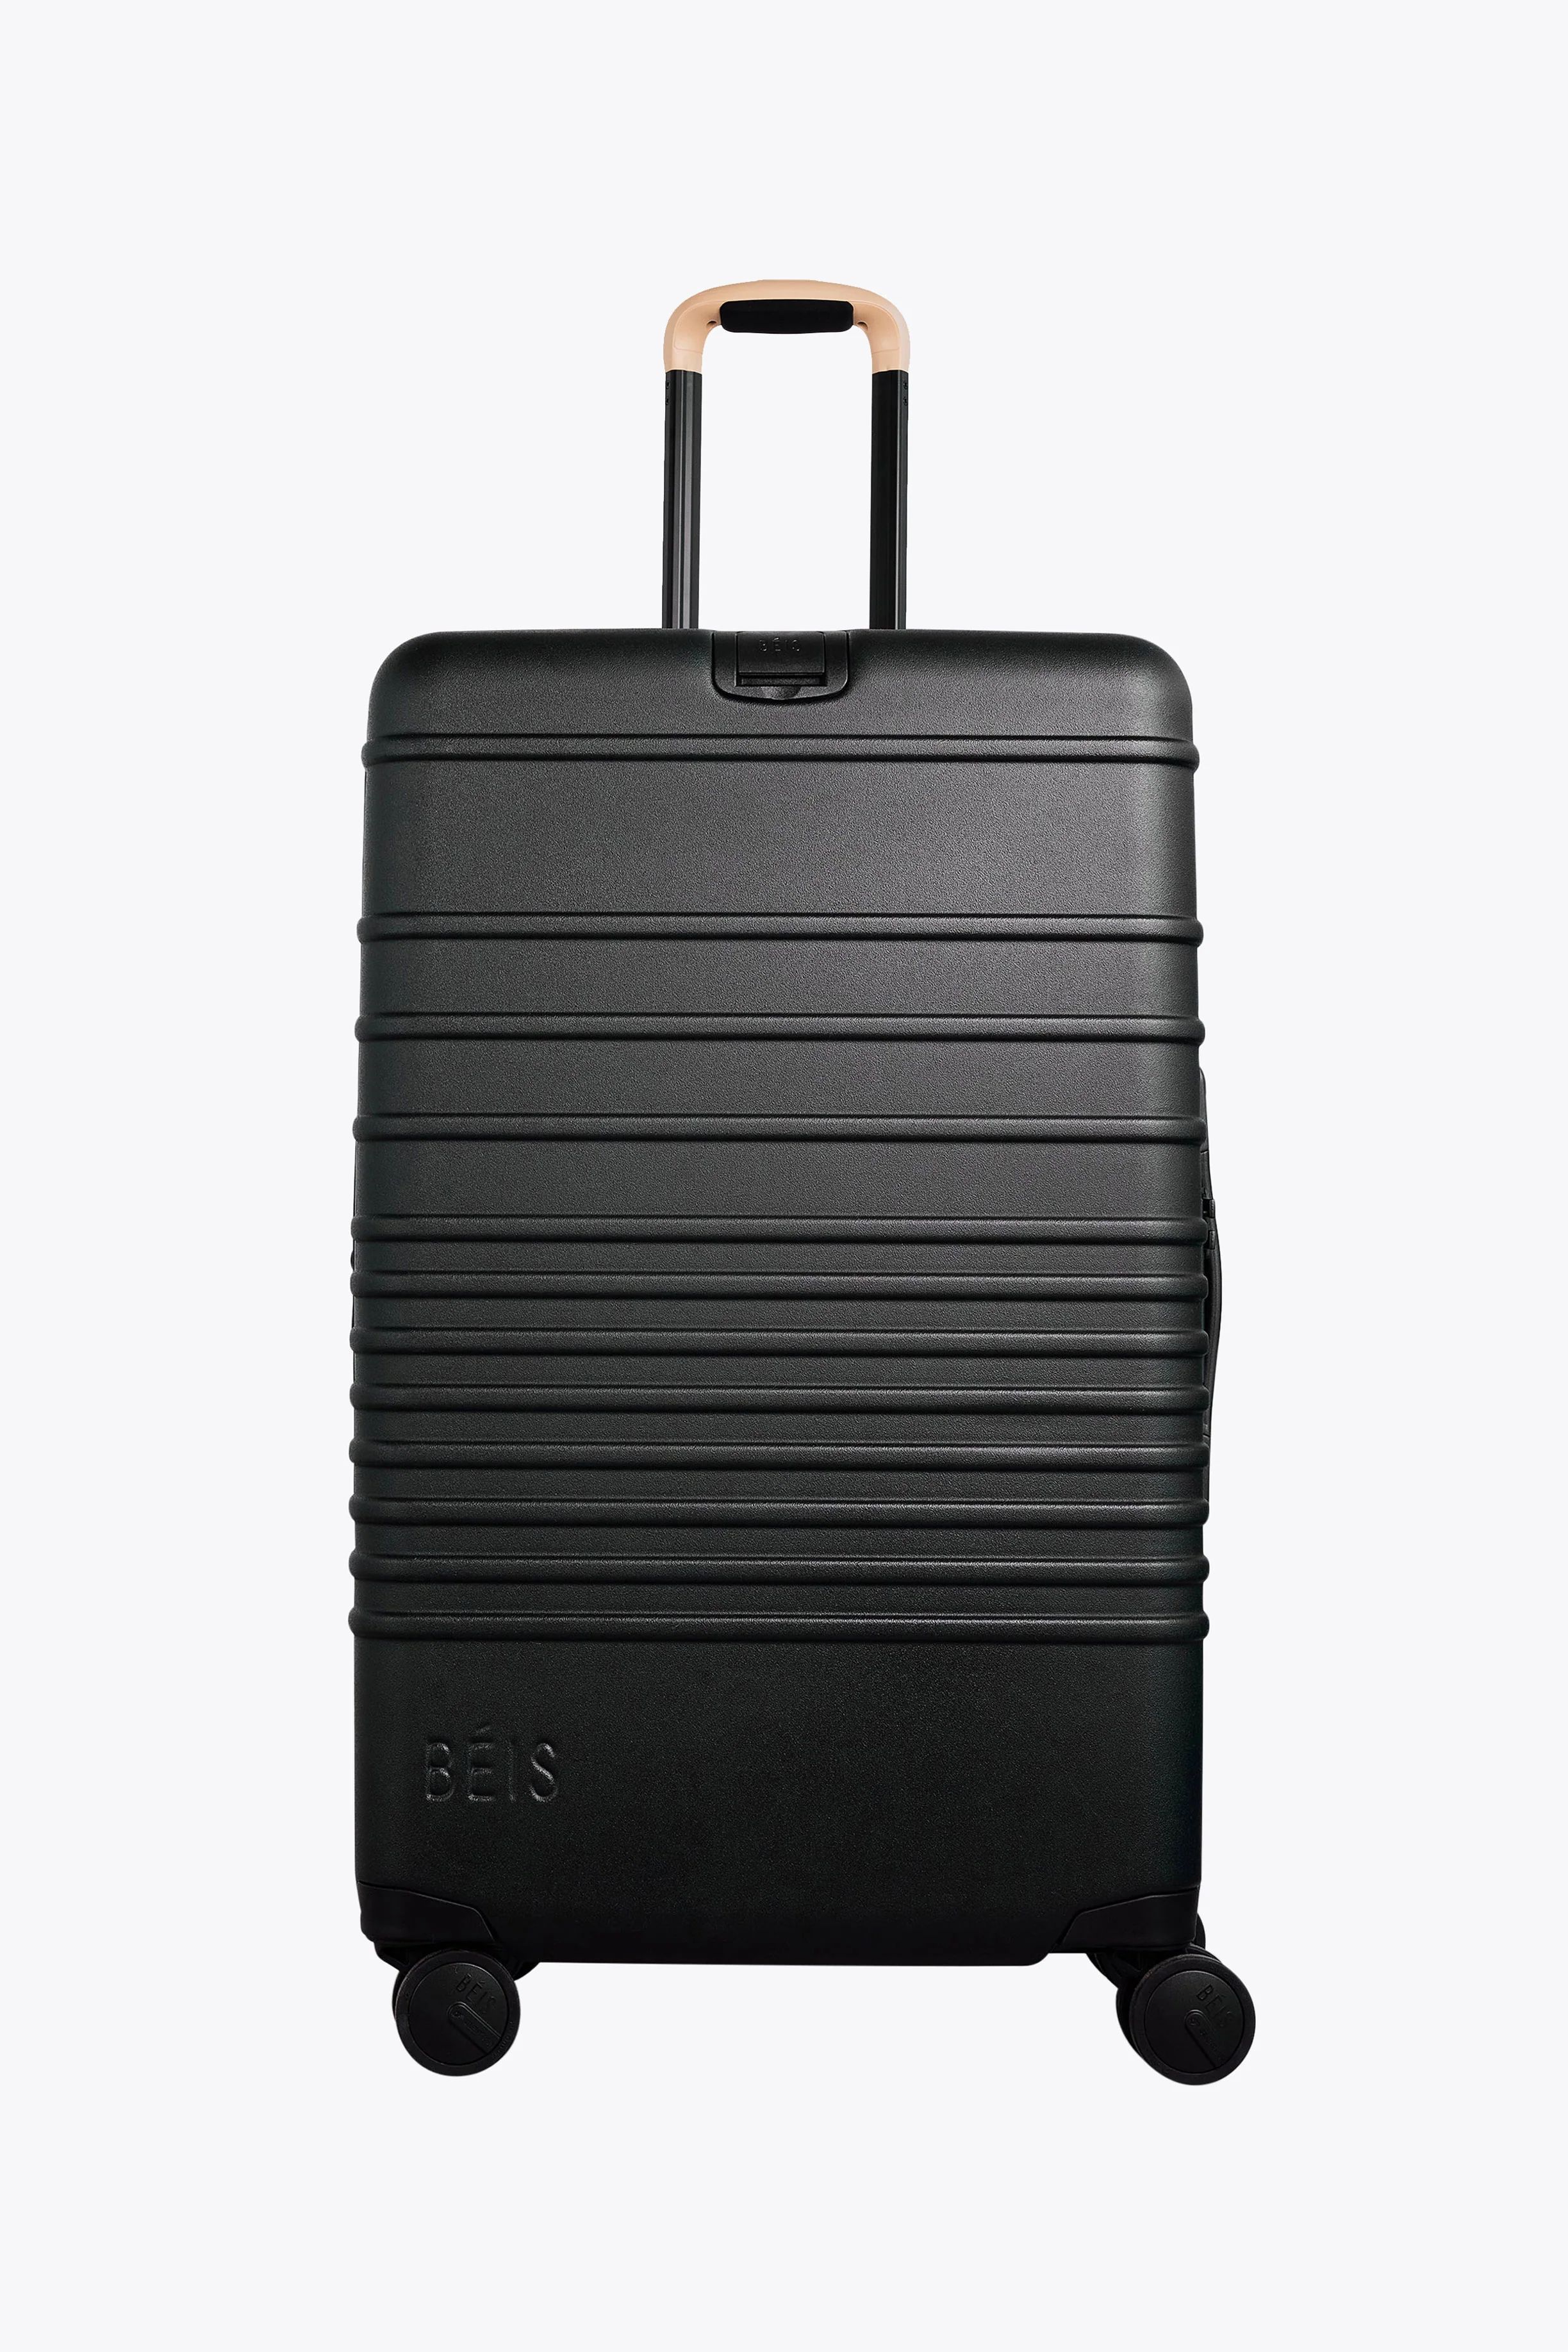 BÉIS 'The Large Check-In Roller' in Black - 29 In Roller Luggage & Suitcase | BÉIS Travel